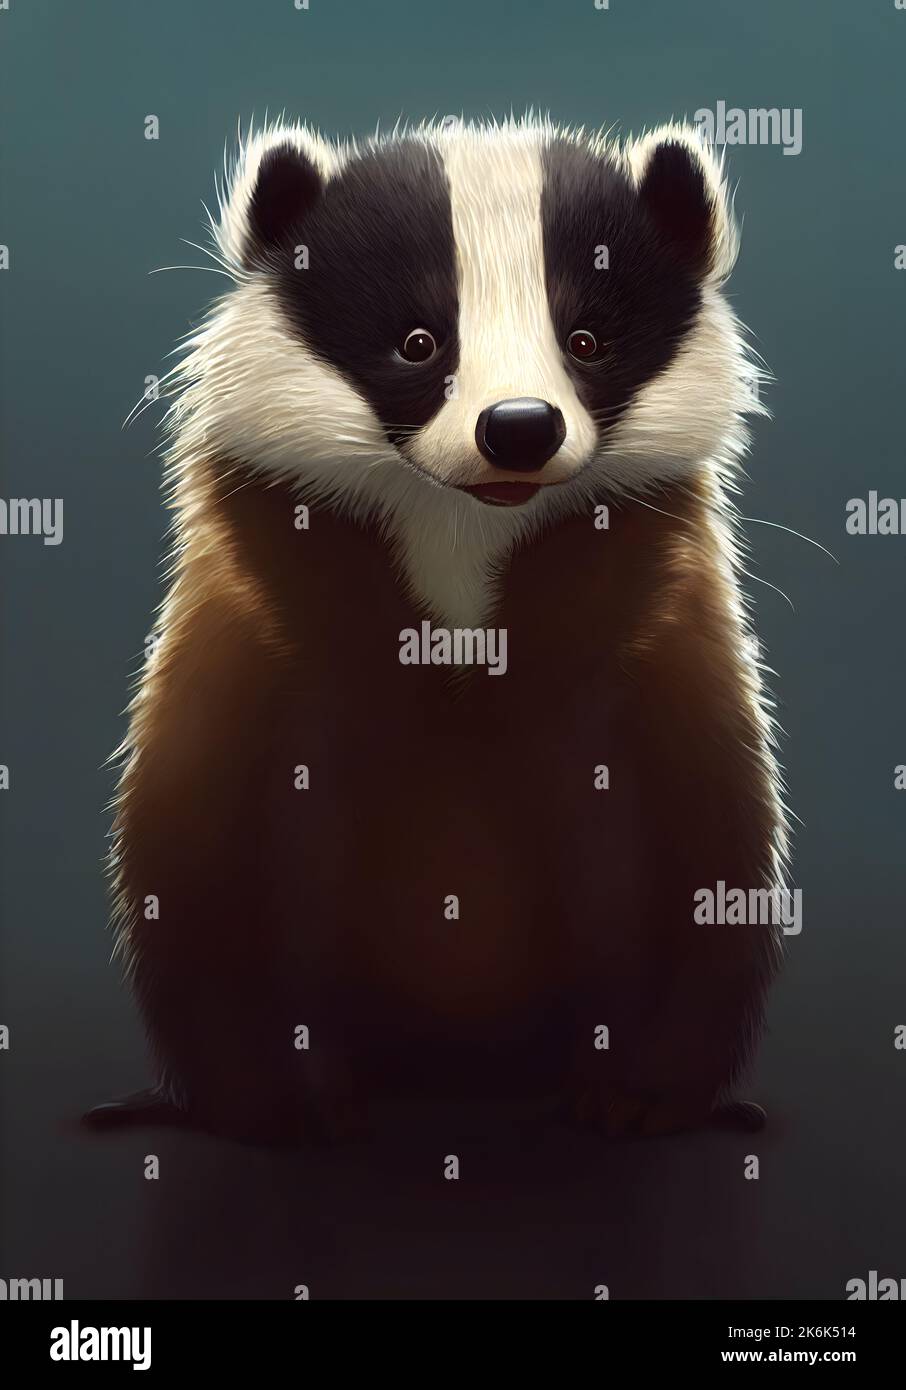 Illustrative drawing of a small badger. Clean background. 3D render. Digital art. Stock Photo